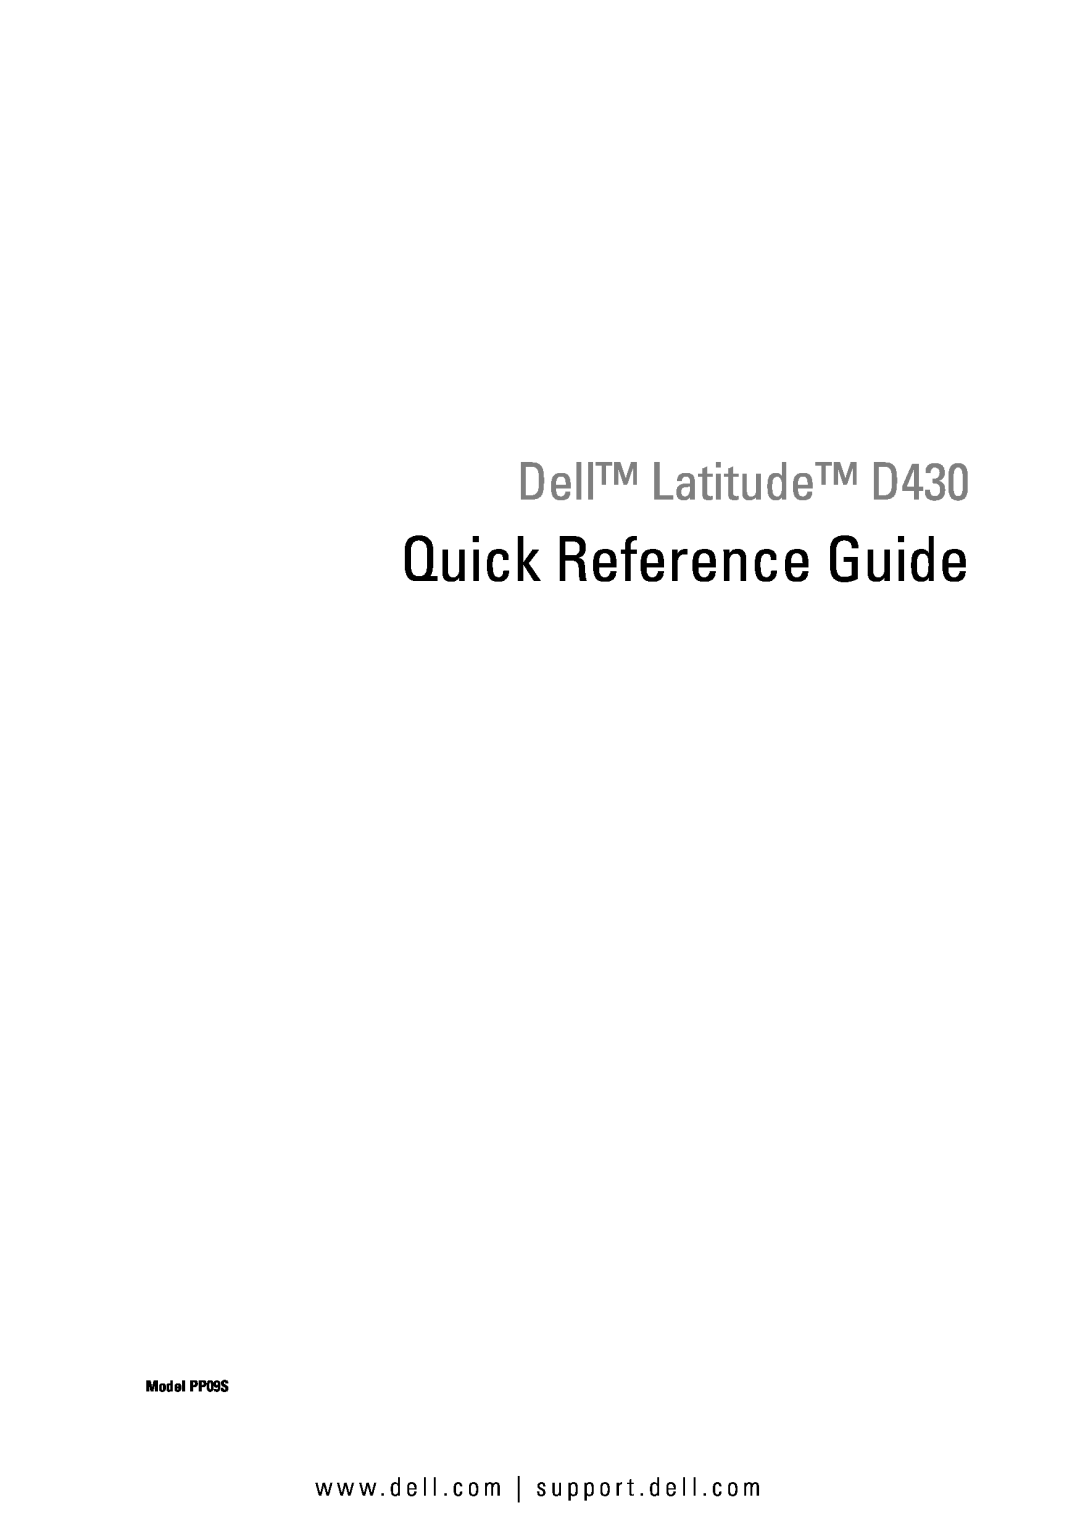 Dell manual Quick Reference Guide, Dell Latitude D430, w w w . d e l l . c o m s u p p o r t . d e l l . c o m 